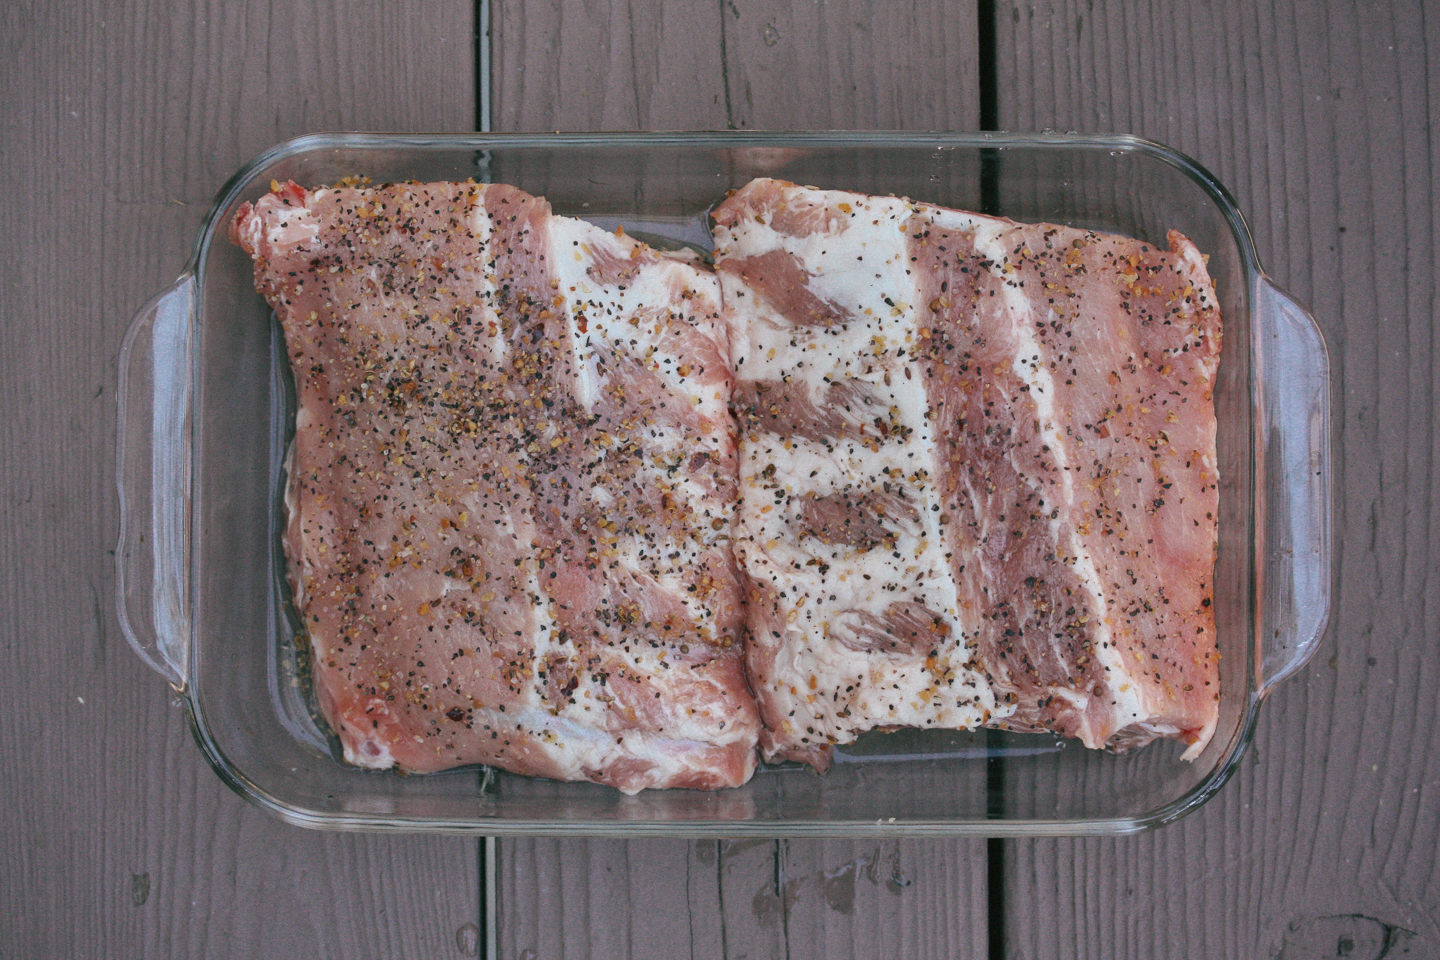 Ribs before the oven